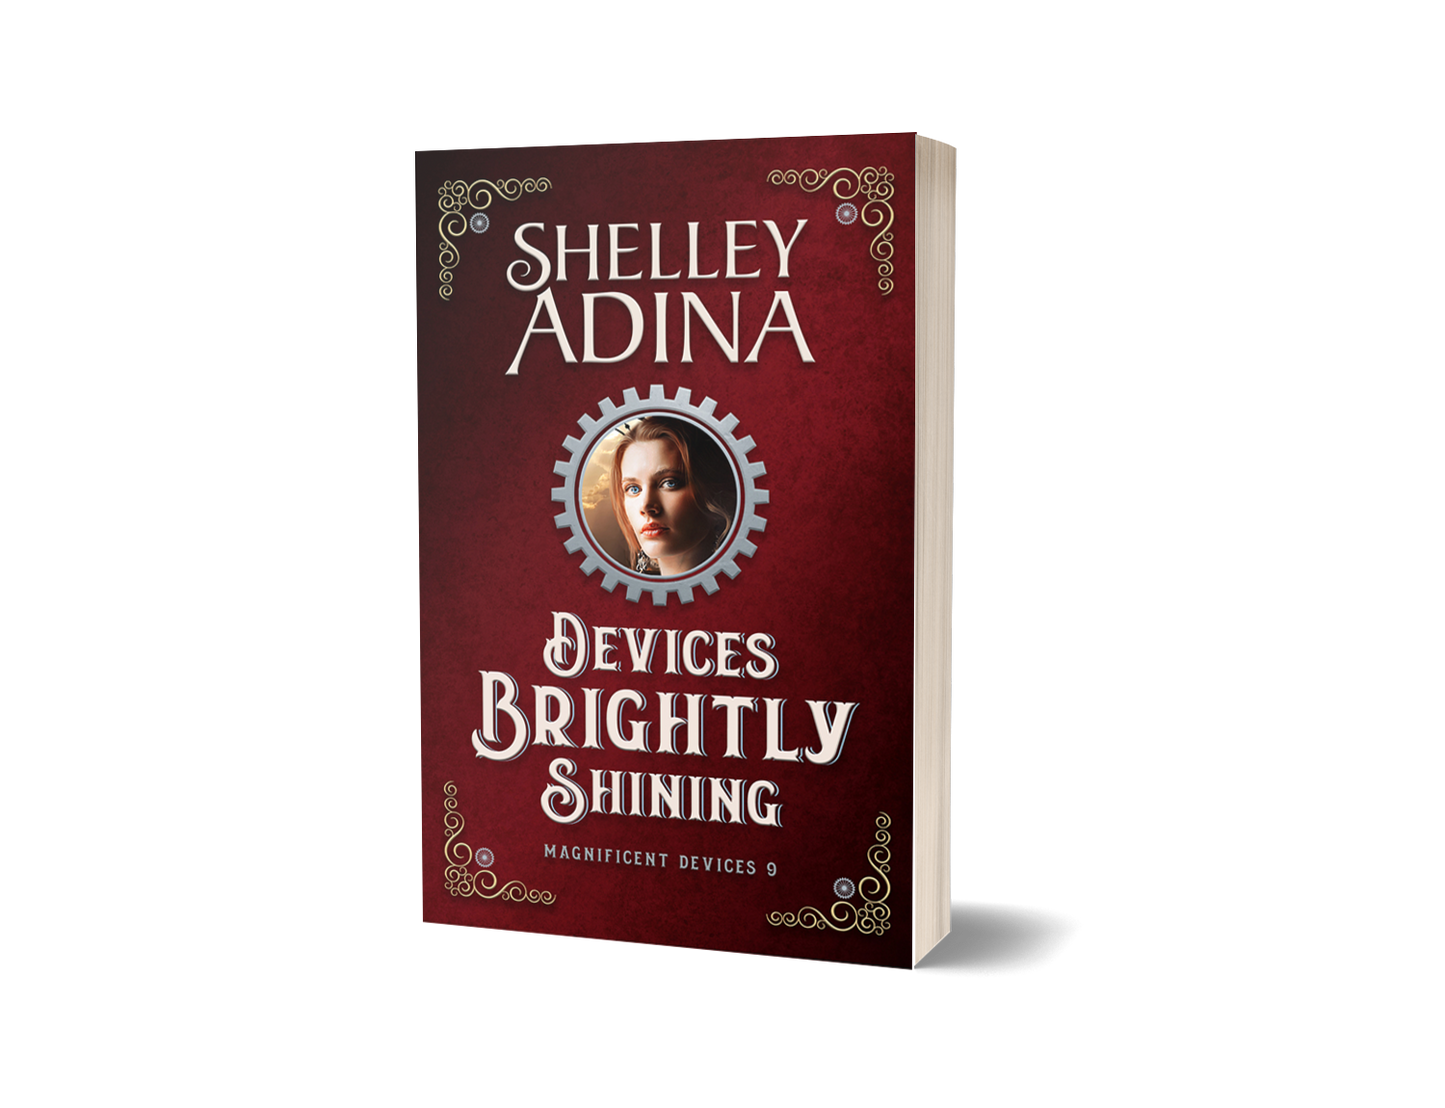 Devices Brightly Shining, a Christmas steampunk adventure novella by Shelley Adina